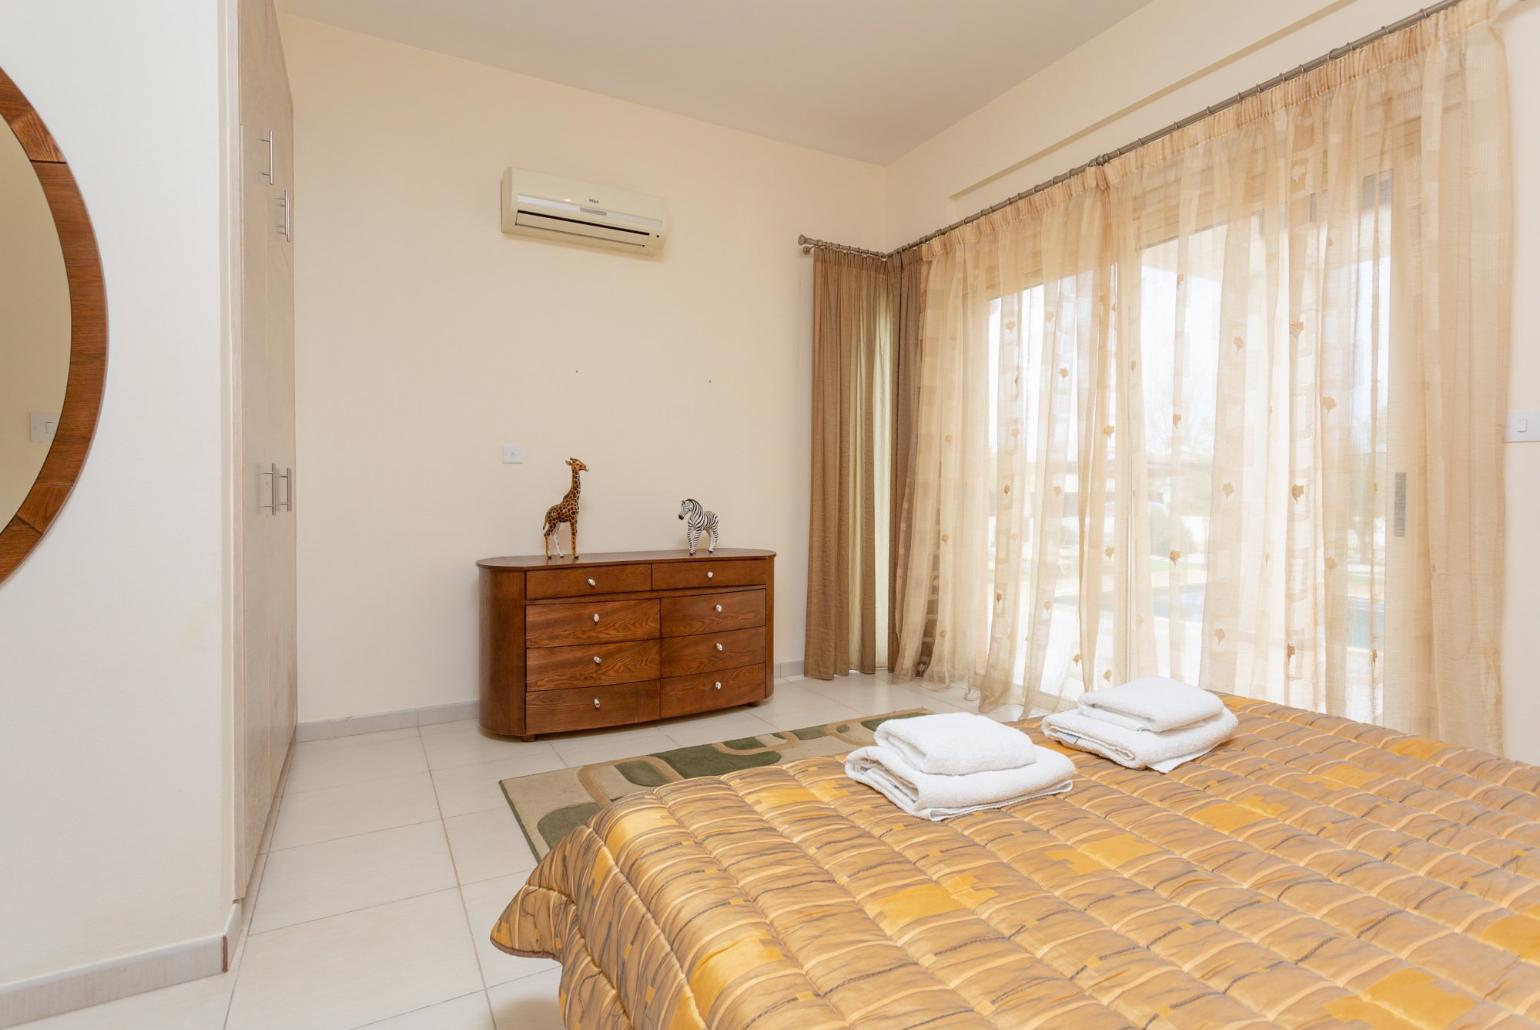 Double bedroom with en suite bathroom, A/C, and terrace access